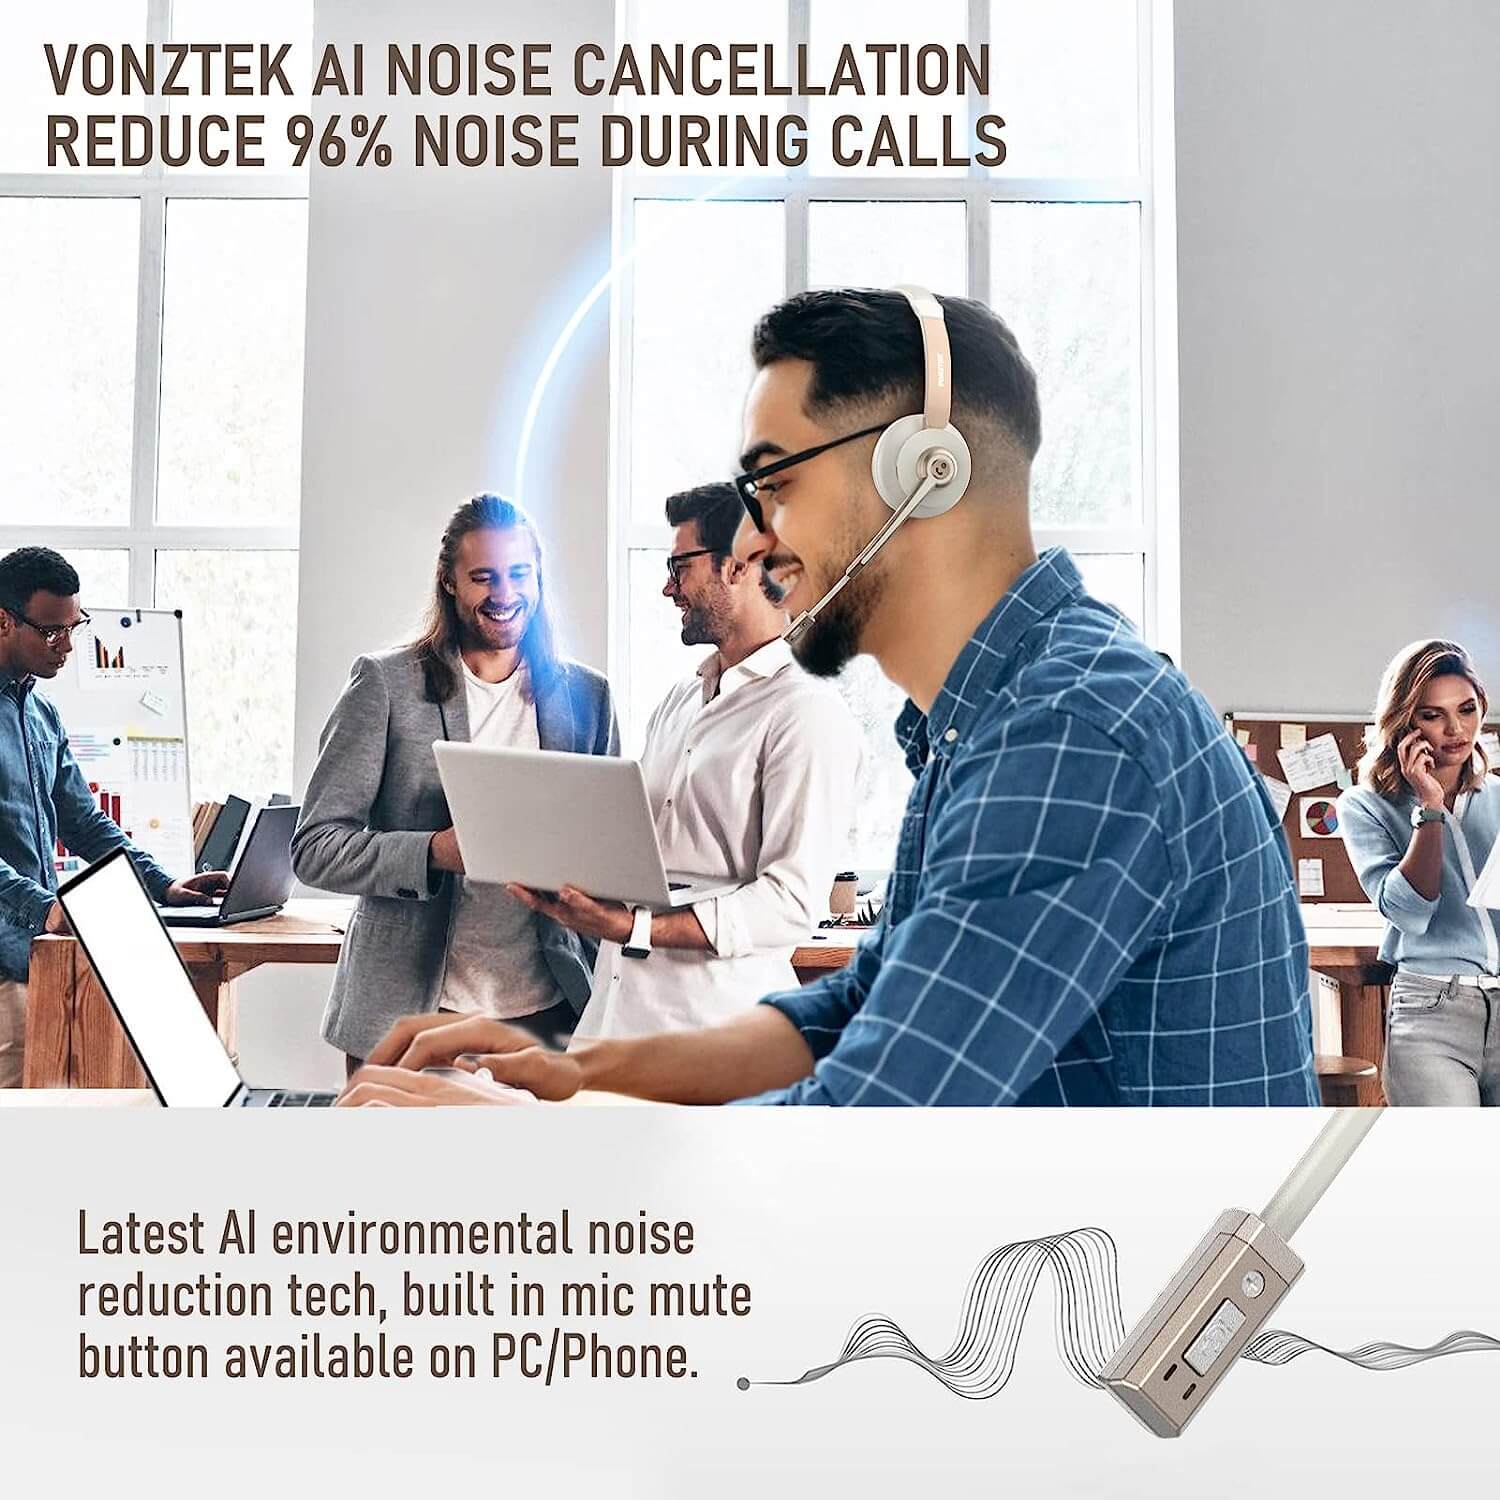 Vonztek ai noise cancellation reduce 96% noise during calls,Latest AI environmental noise reduction tech,built in mic mute button available on PC/Phone.